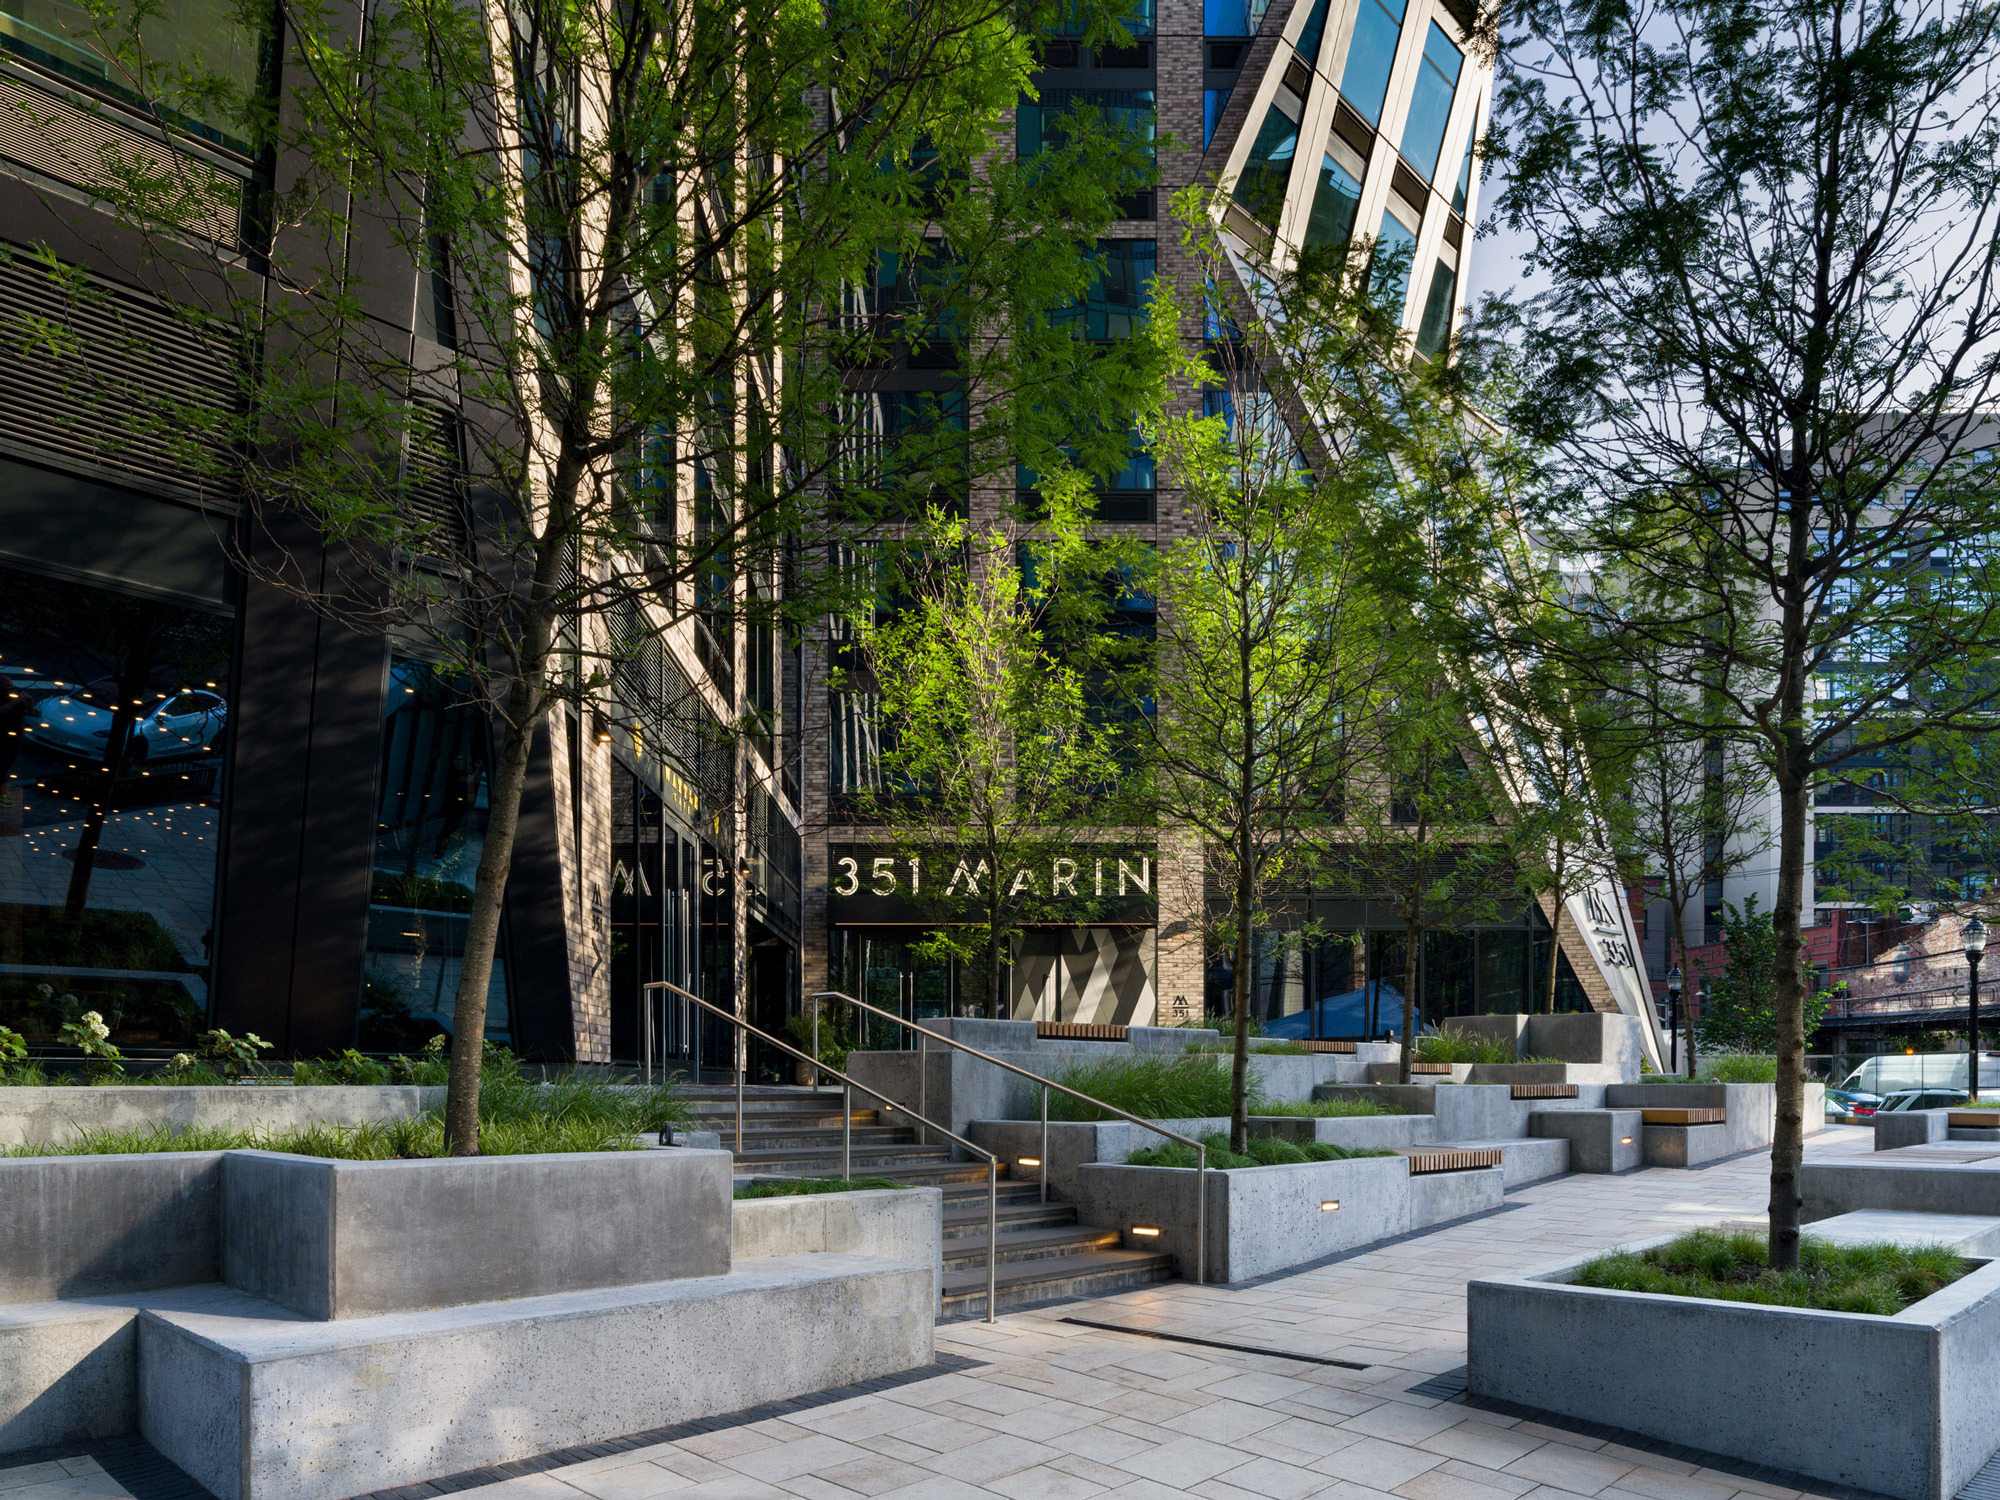 Urban landscape design featuring a series of concrete planters and integrated seating, enhancing the pedestrian experience at the entrance of a modern building. Young trees and assorted greenery soften the hardscape, adding a touch of nature to the setting. The architecture displays a mix of reflective glass and metal elements, with building signage prominently displayed. The area is complemented by a stone pathway and subtle lighting, inviting passersby to a serene enclave amidst the city bustle.